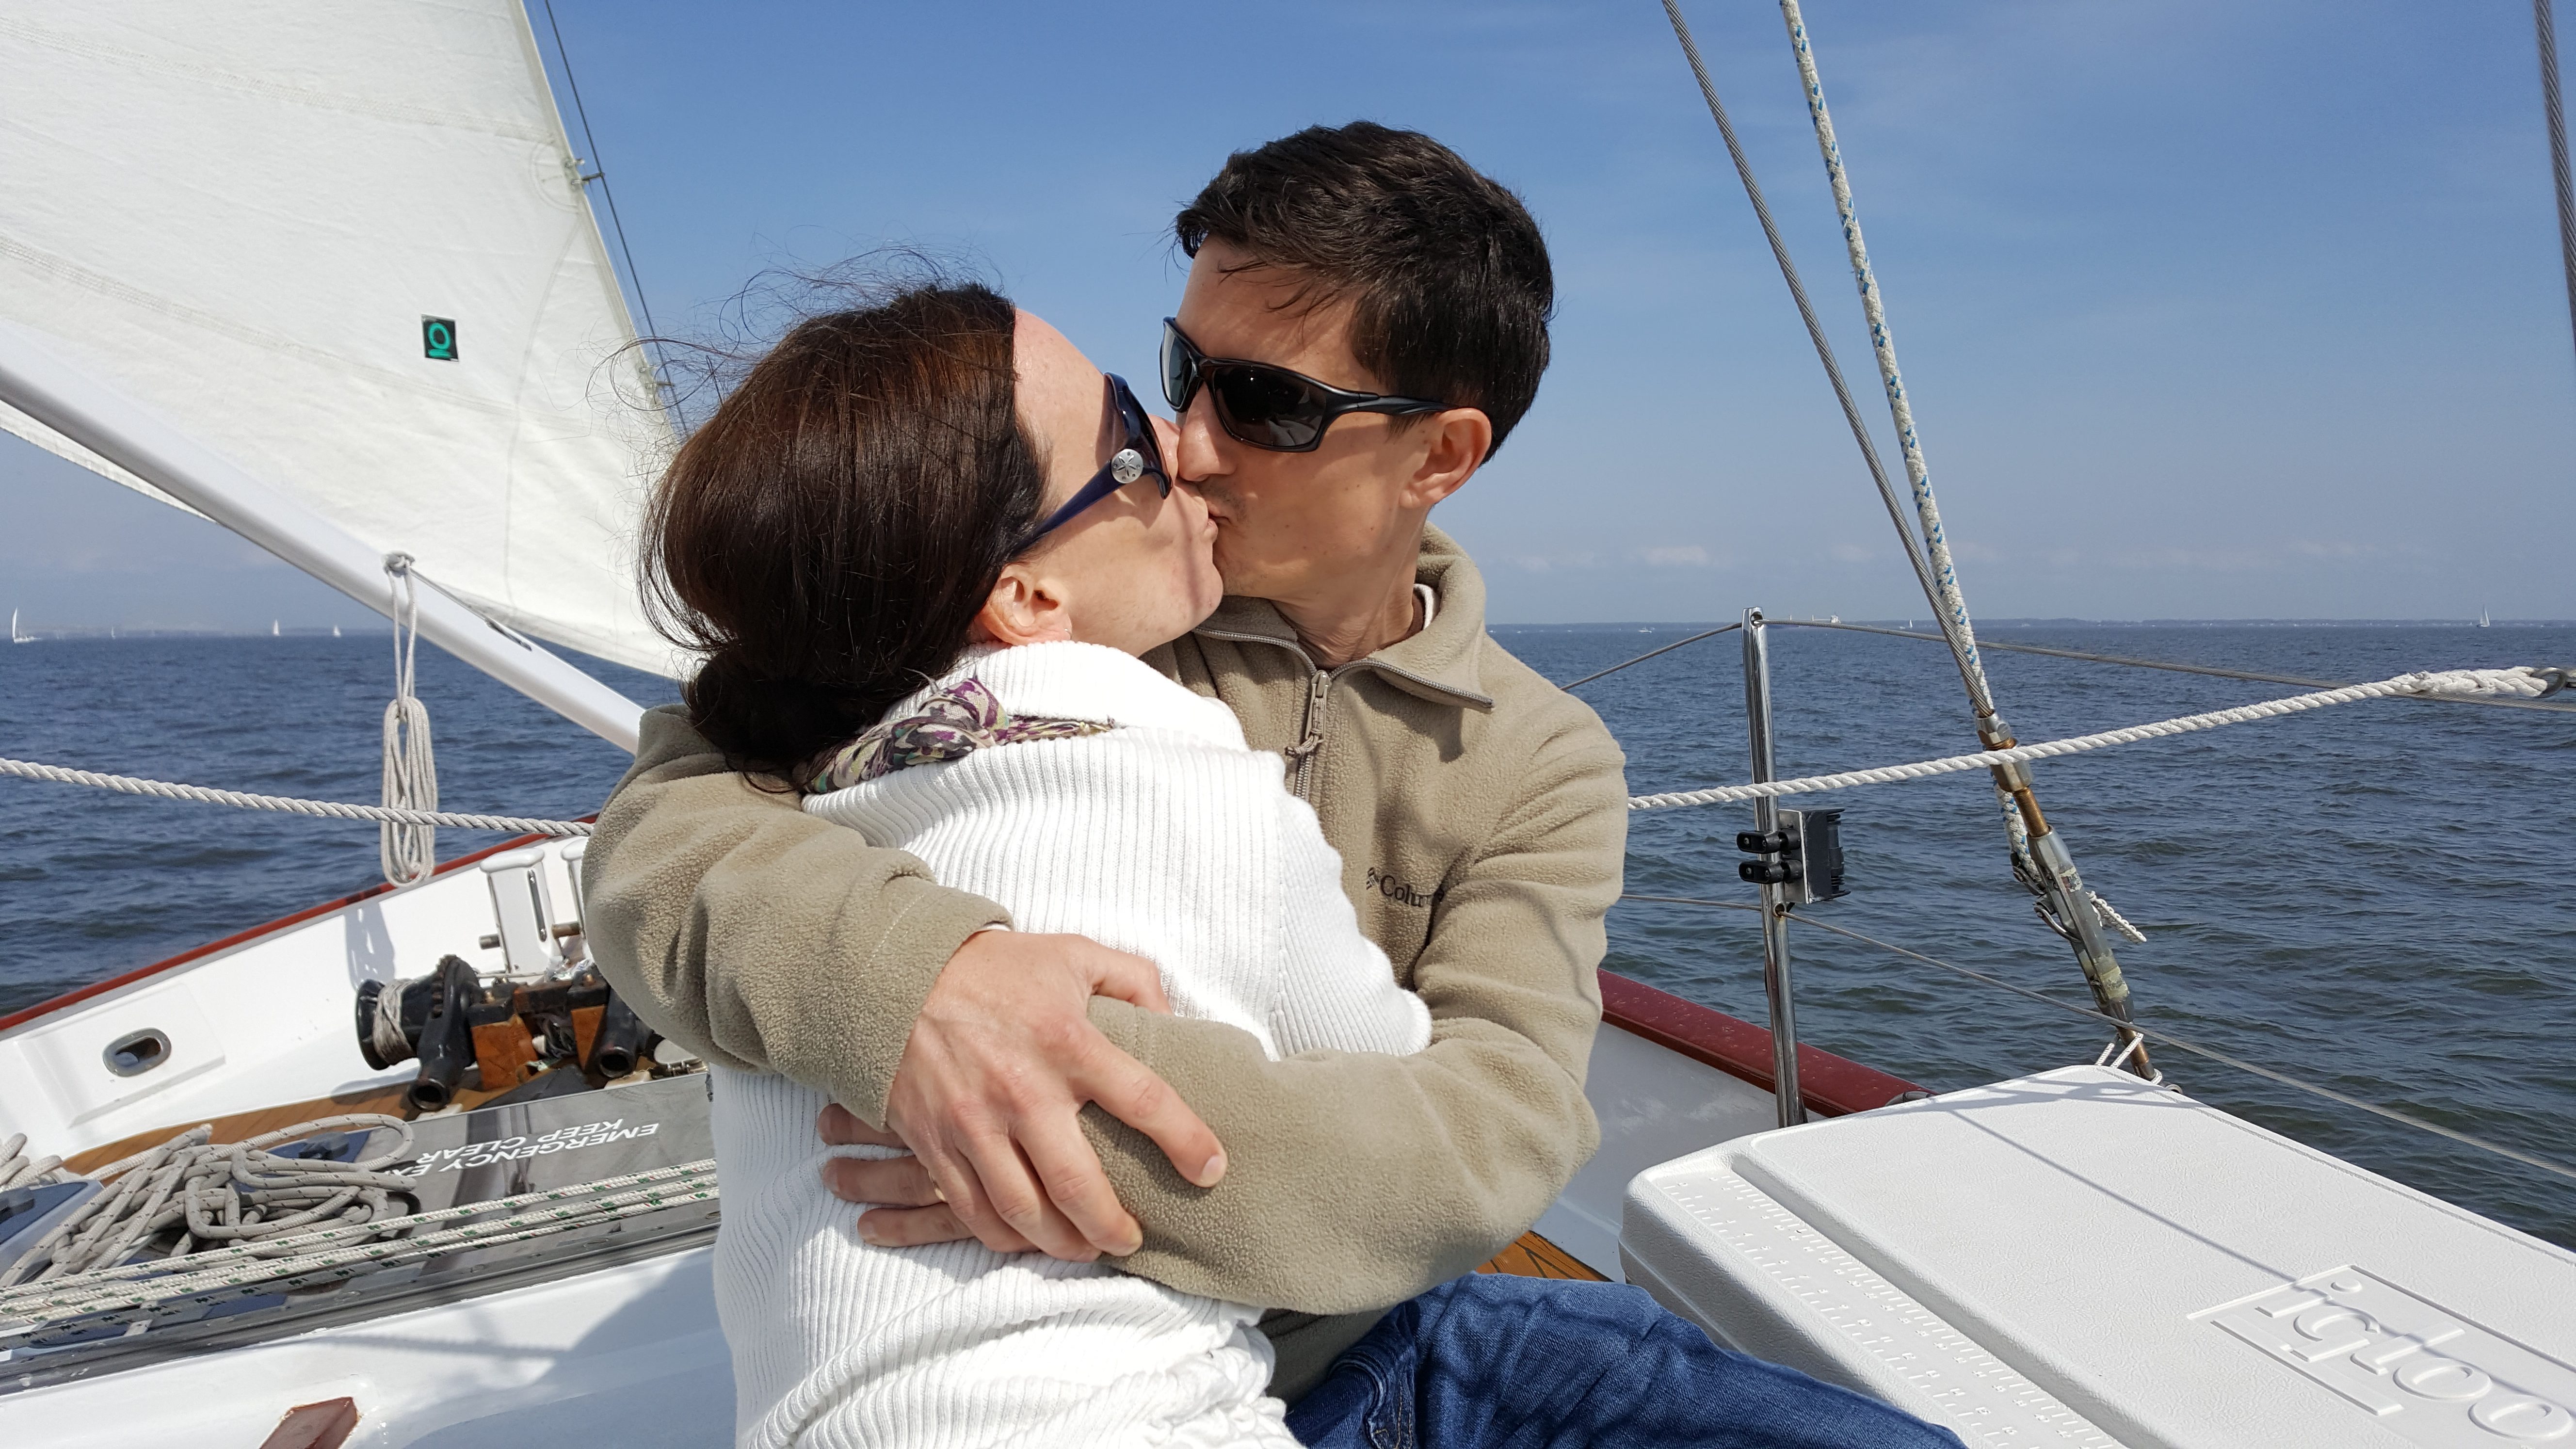 Young couple kissing on boat with blue water and sky